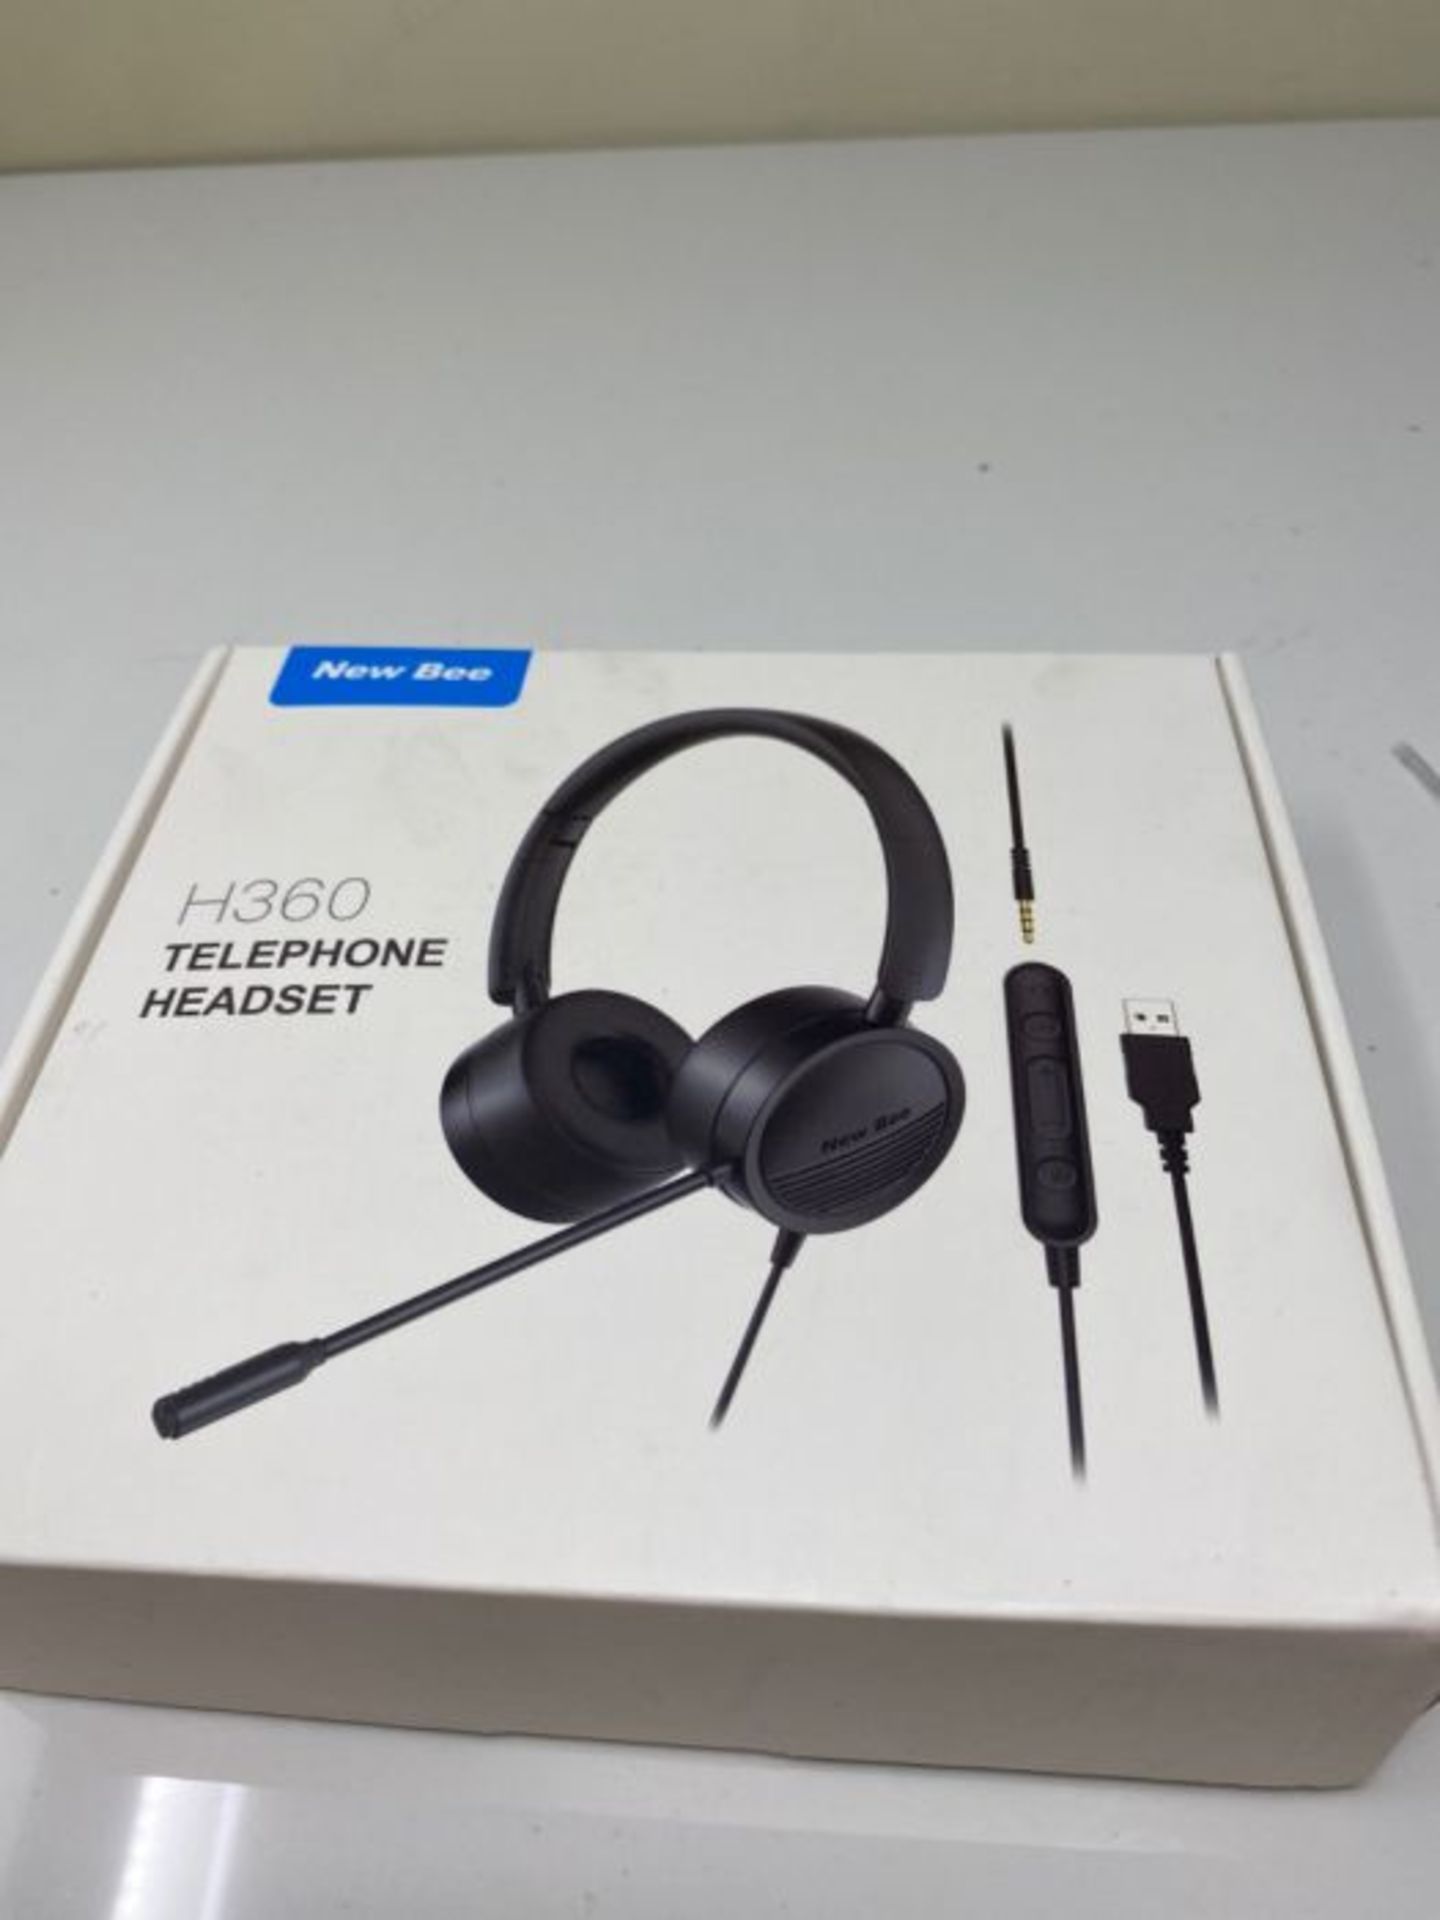 New Bee USB Headsets with Microphone with 3.5mm Jack Noise Cancelling Mic Comfortable - Image 2 of 3